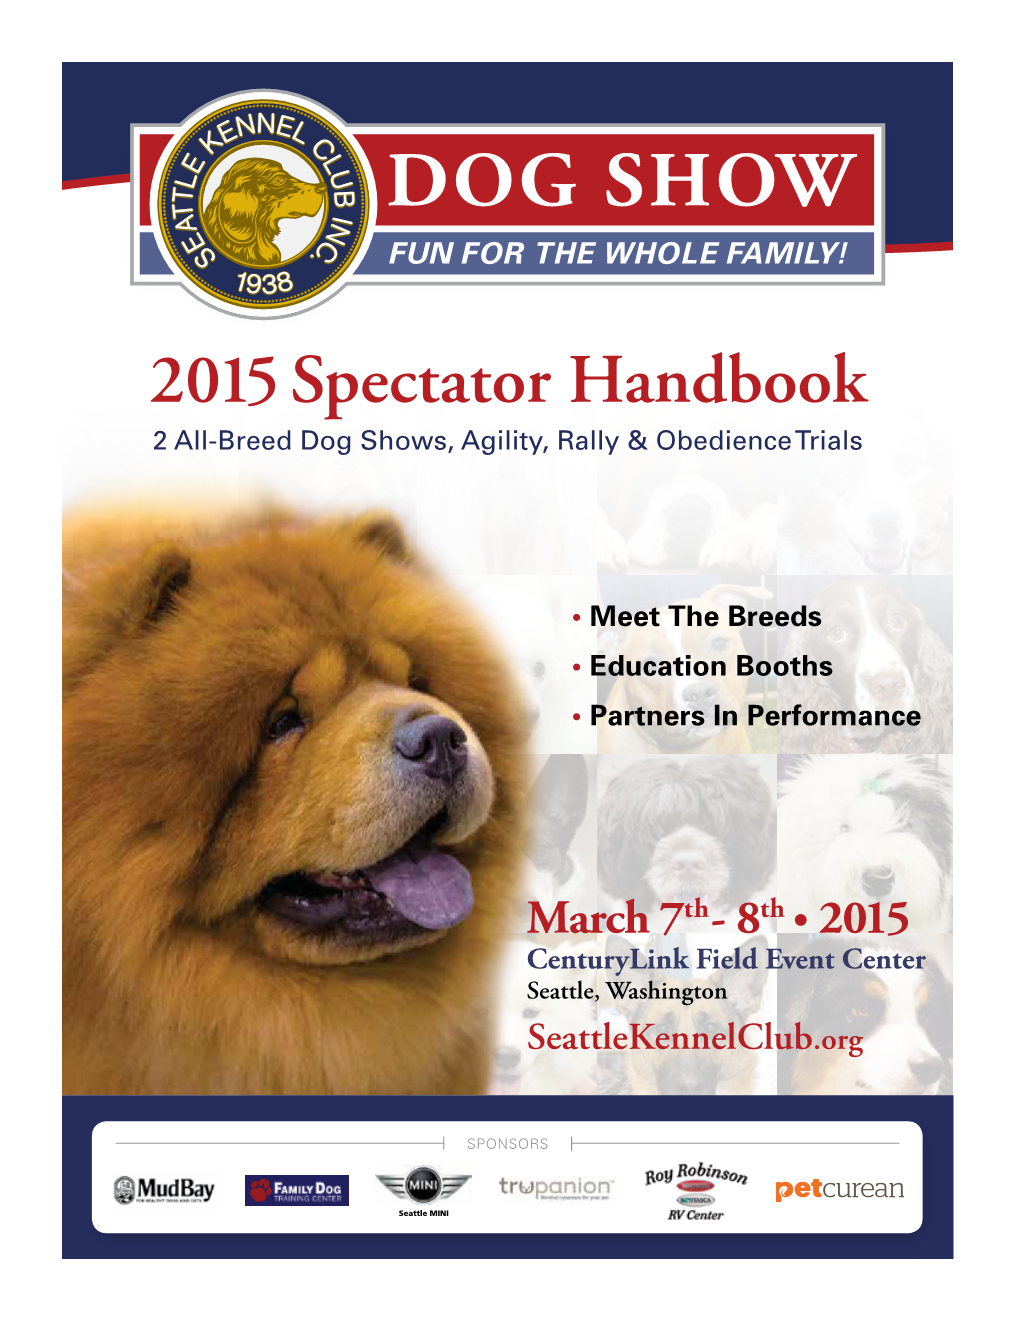 2015 Spectator Handbook 2 All-Breed Dog Shows, Agility, Rally & Obedience Trials